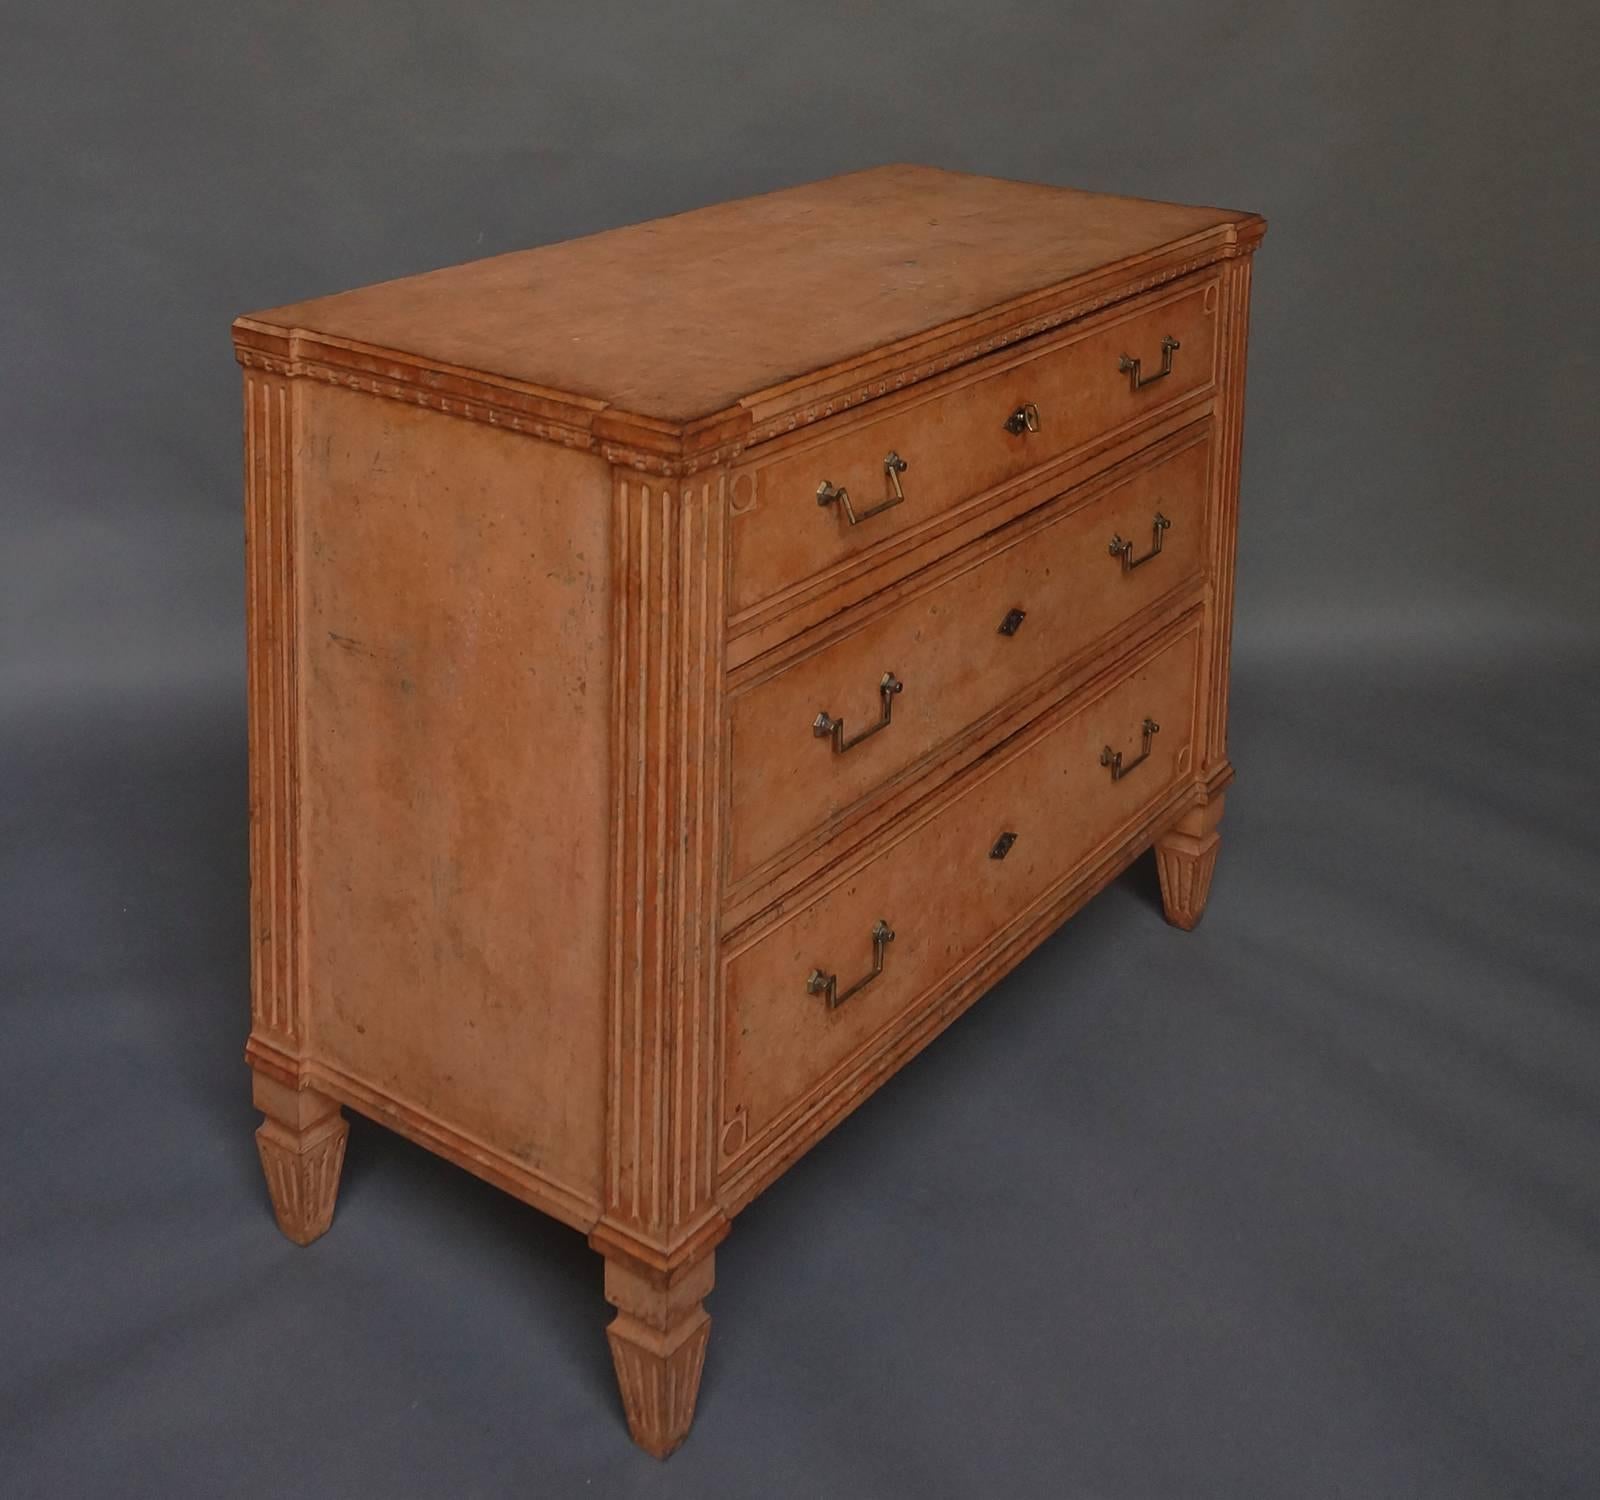 Swedish neoclassical chest of drawers, circa 1850, in salmon paint. Dentil molding, reeded corner columns, and raised panels on the drawer fronts. Brass pulls and escutcheons.